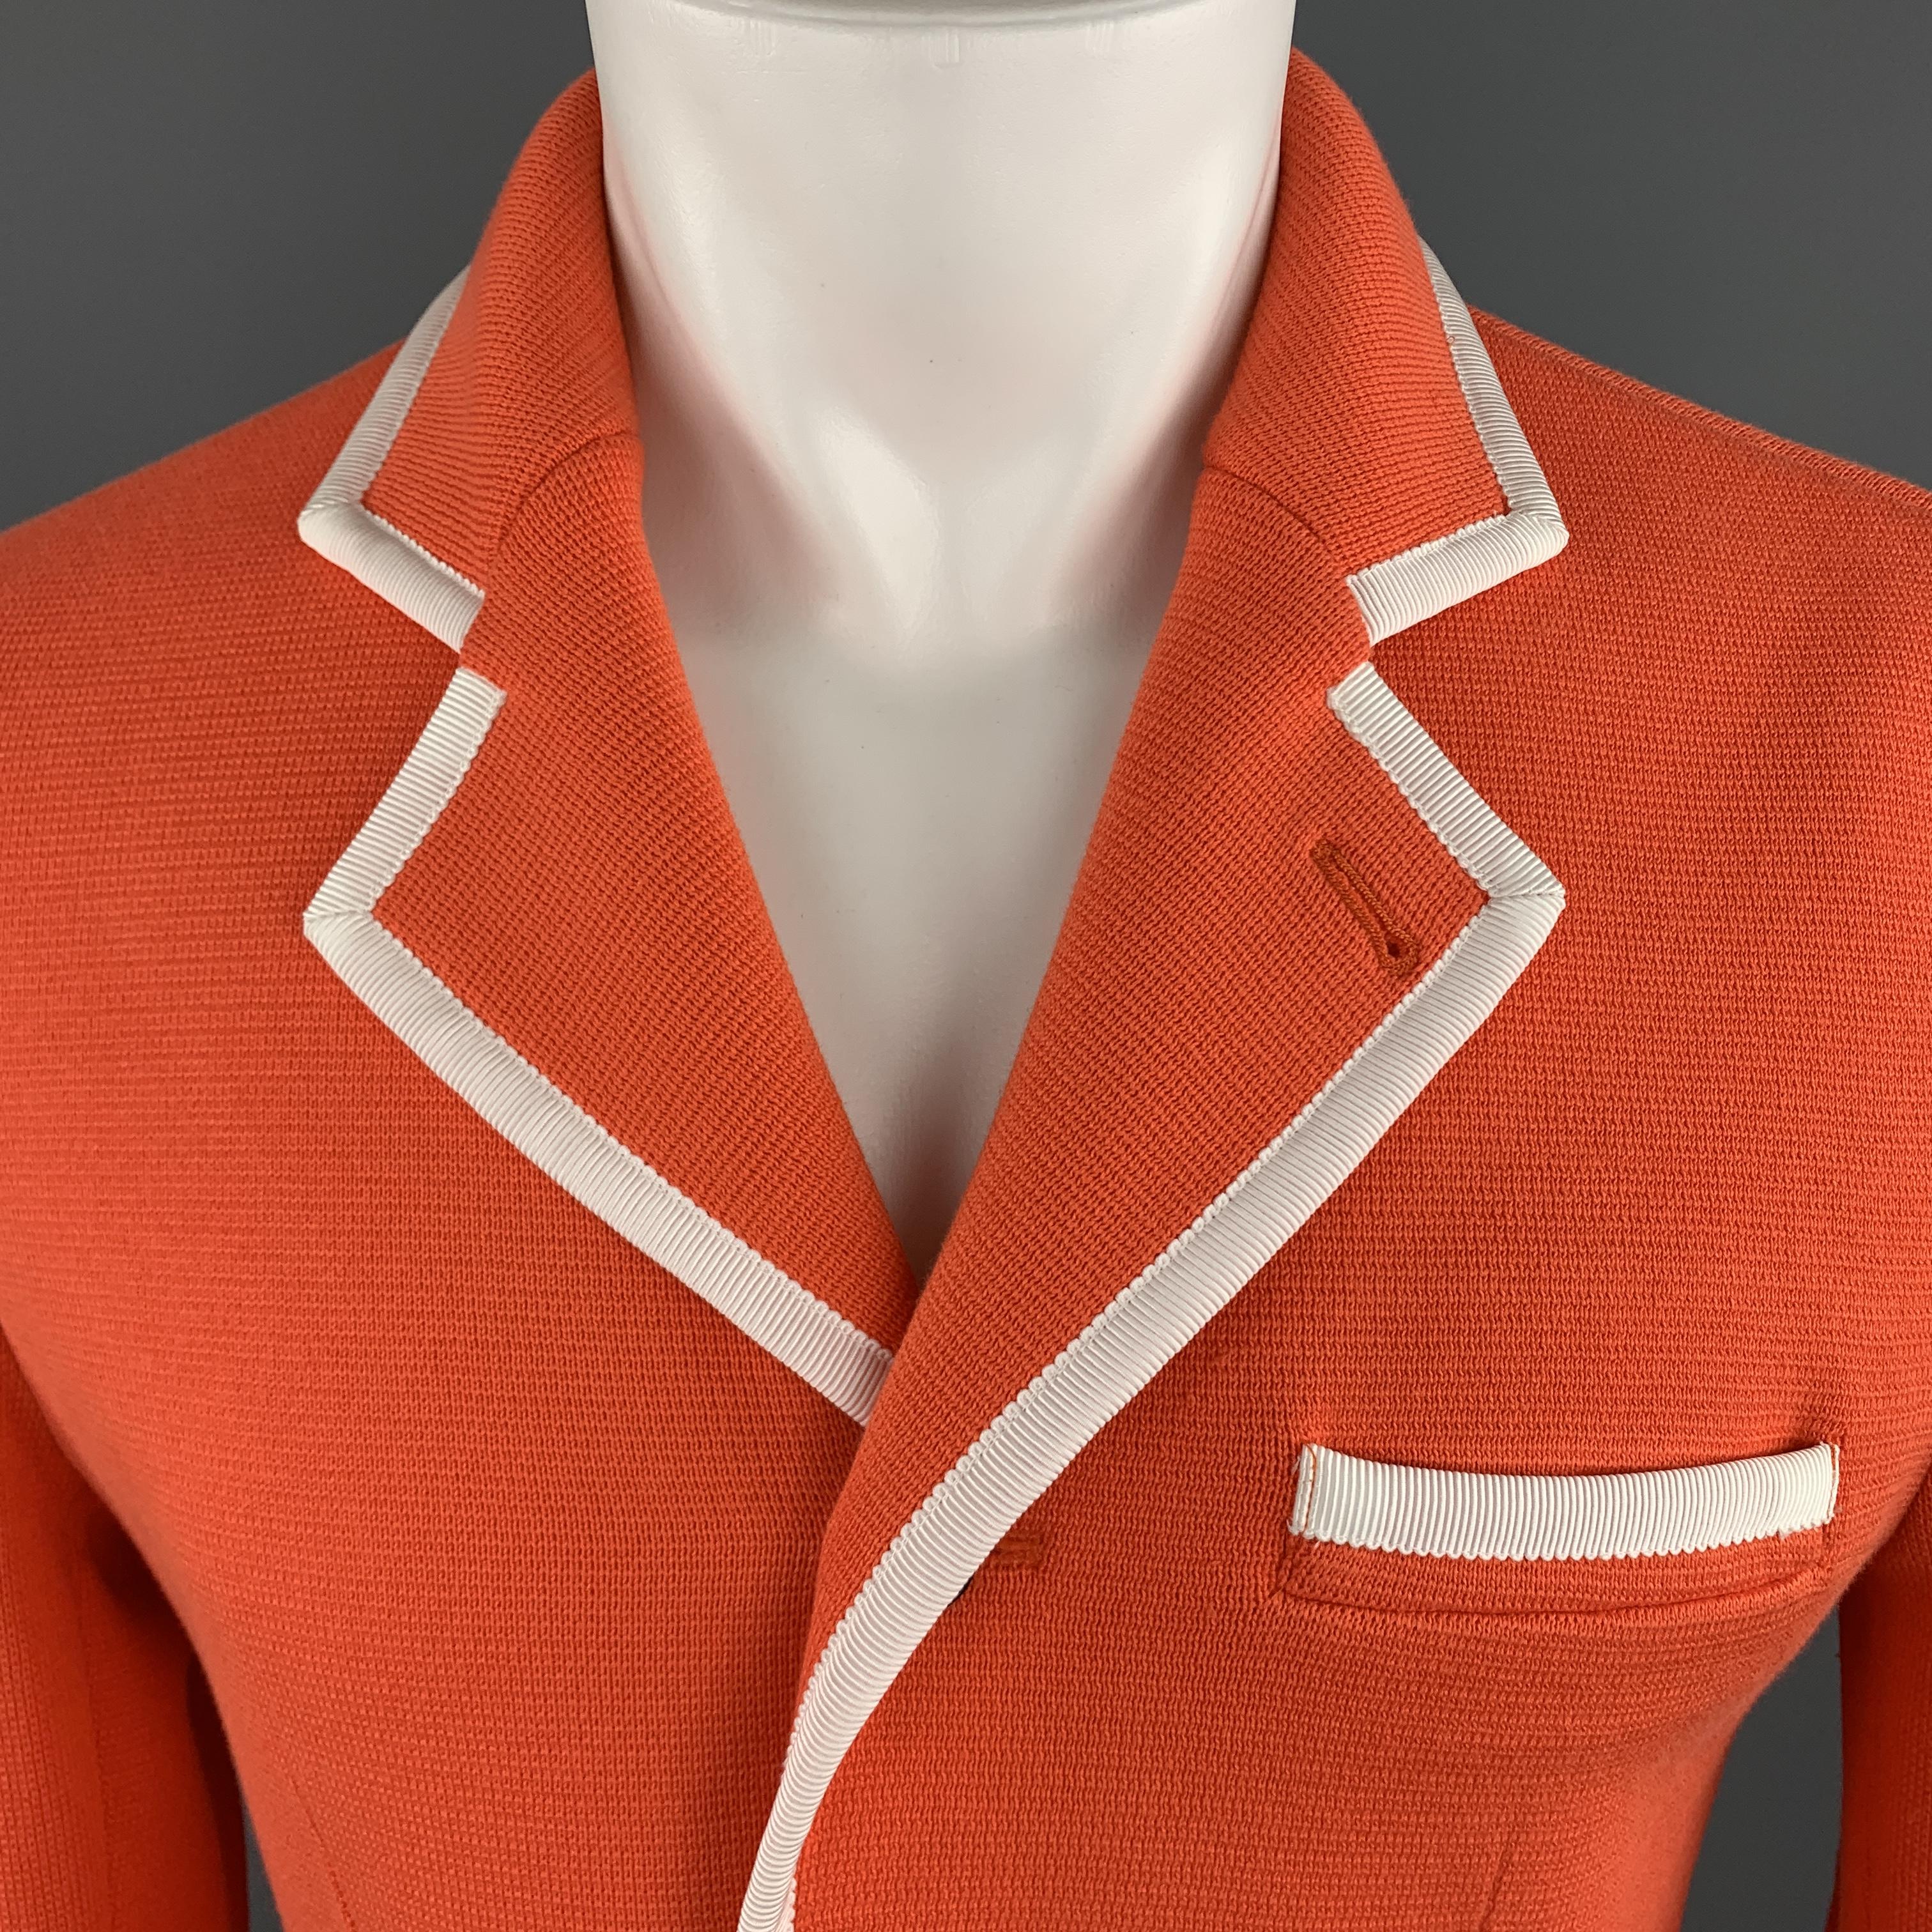 BLACK FLEECE sport coat comes in orange cotton knit with a notch lapel, single breasted, two silver tone metal button front, and cream faille contrast piping throughout. Tags removed. As is.

Excellent Pre-Owned Condition.
Marked: (no size